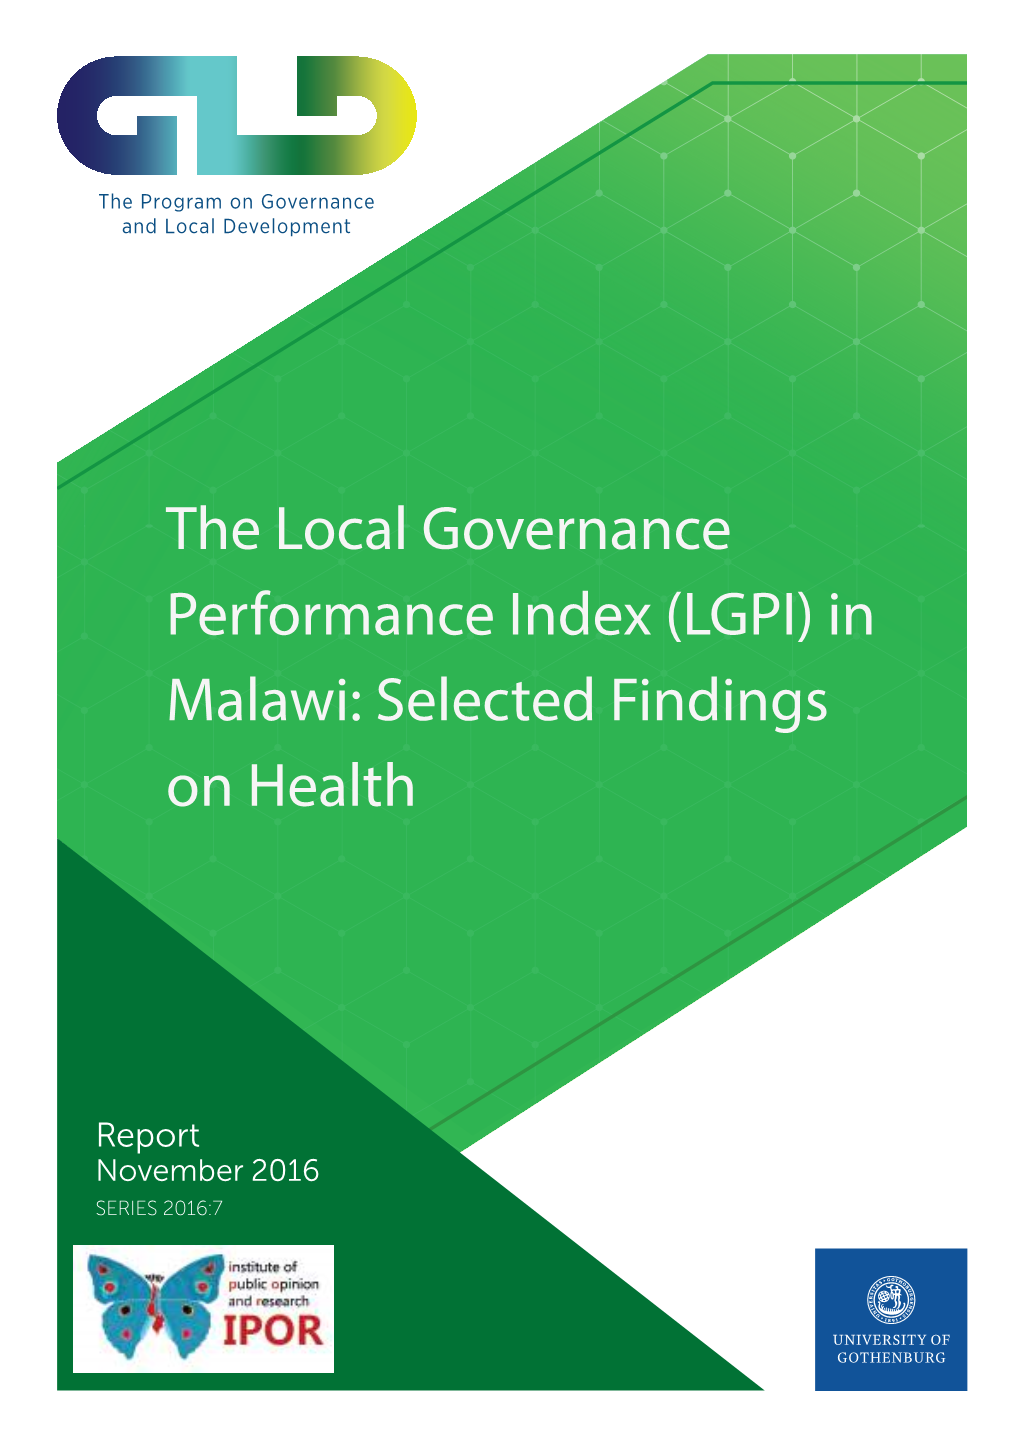 The Local Governance Performance Index (LGPI) in Malawi: Selected Findings on Health